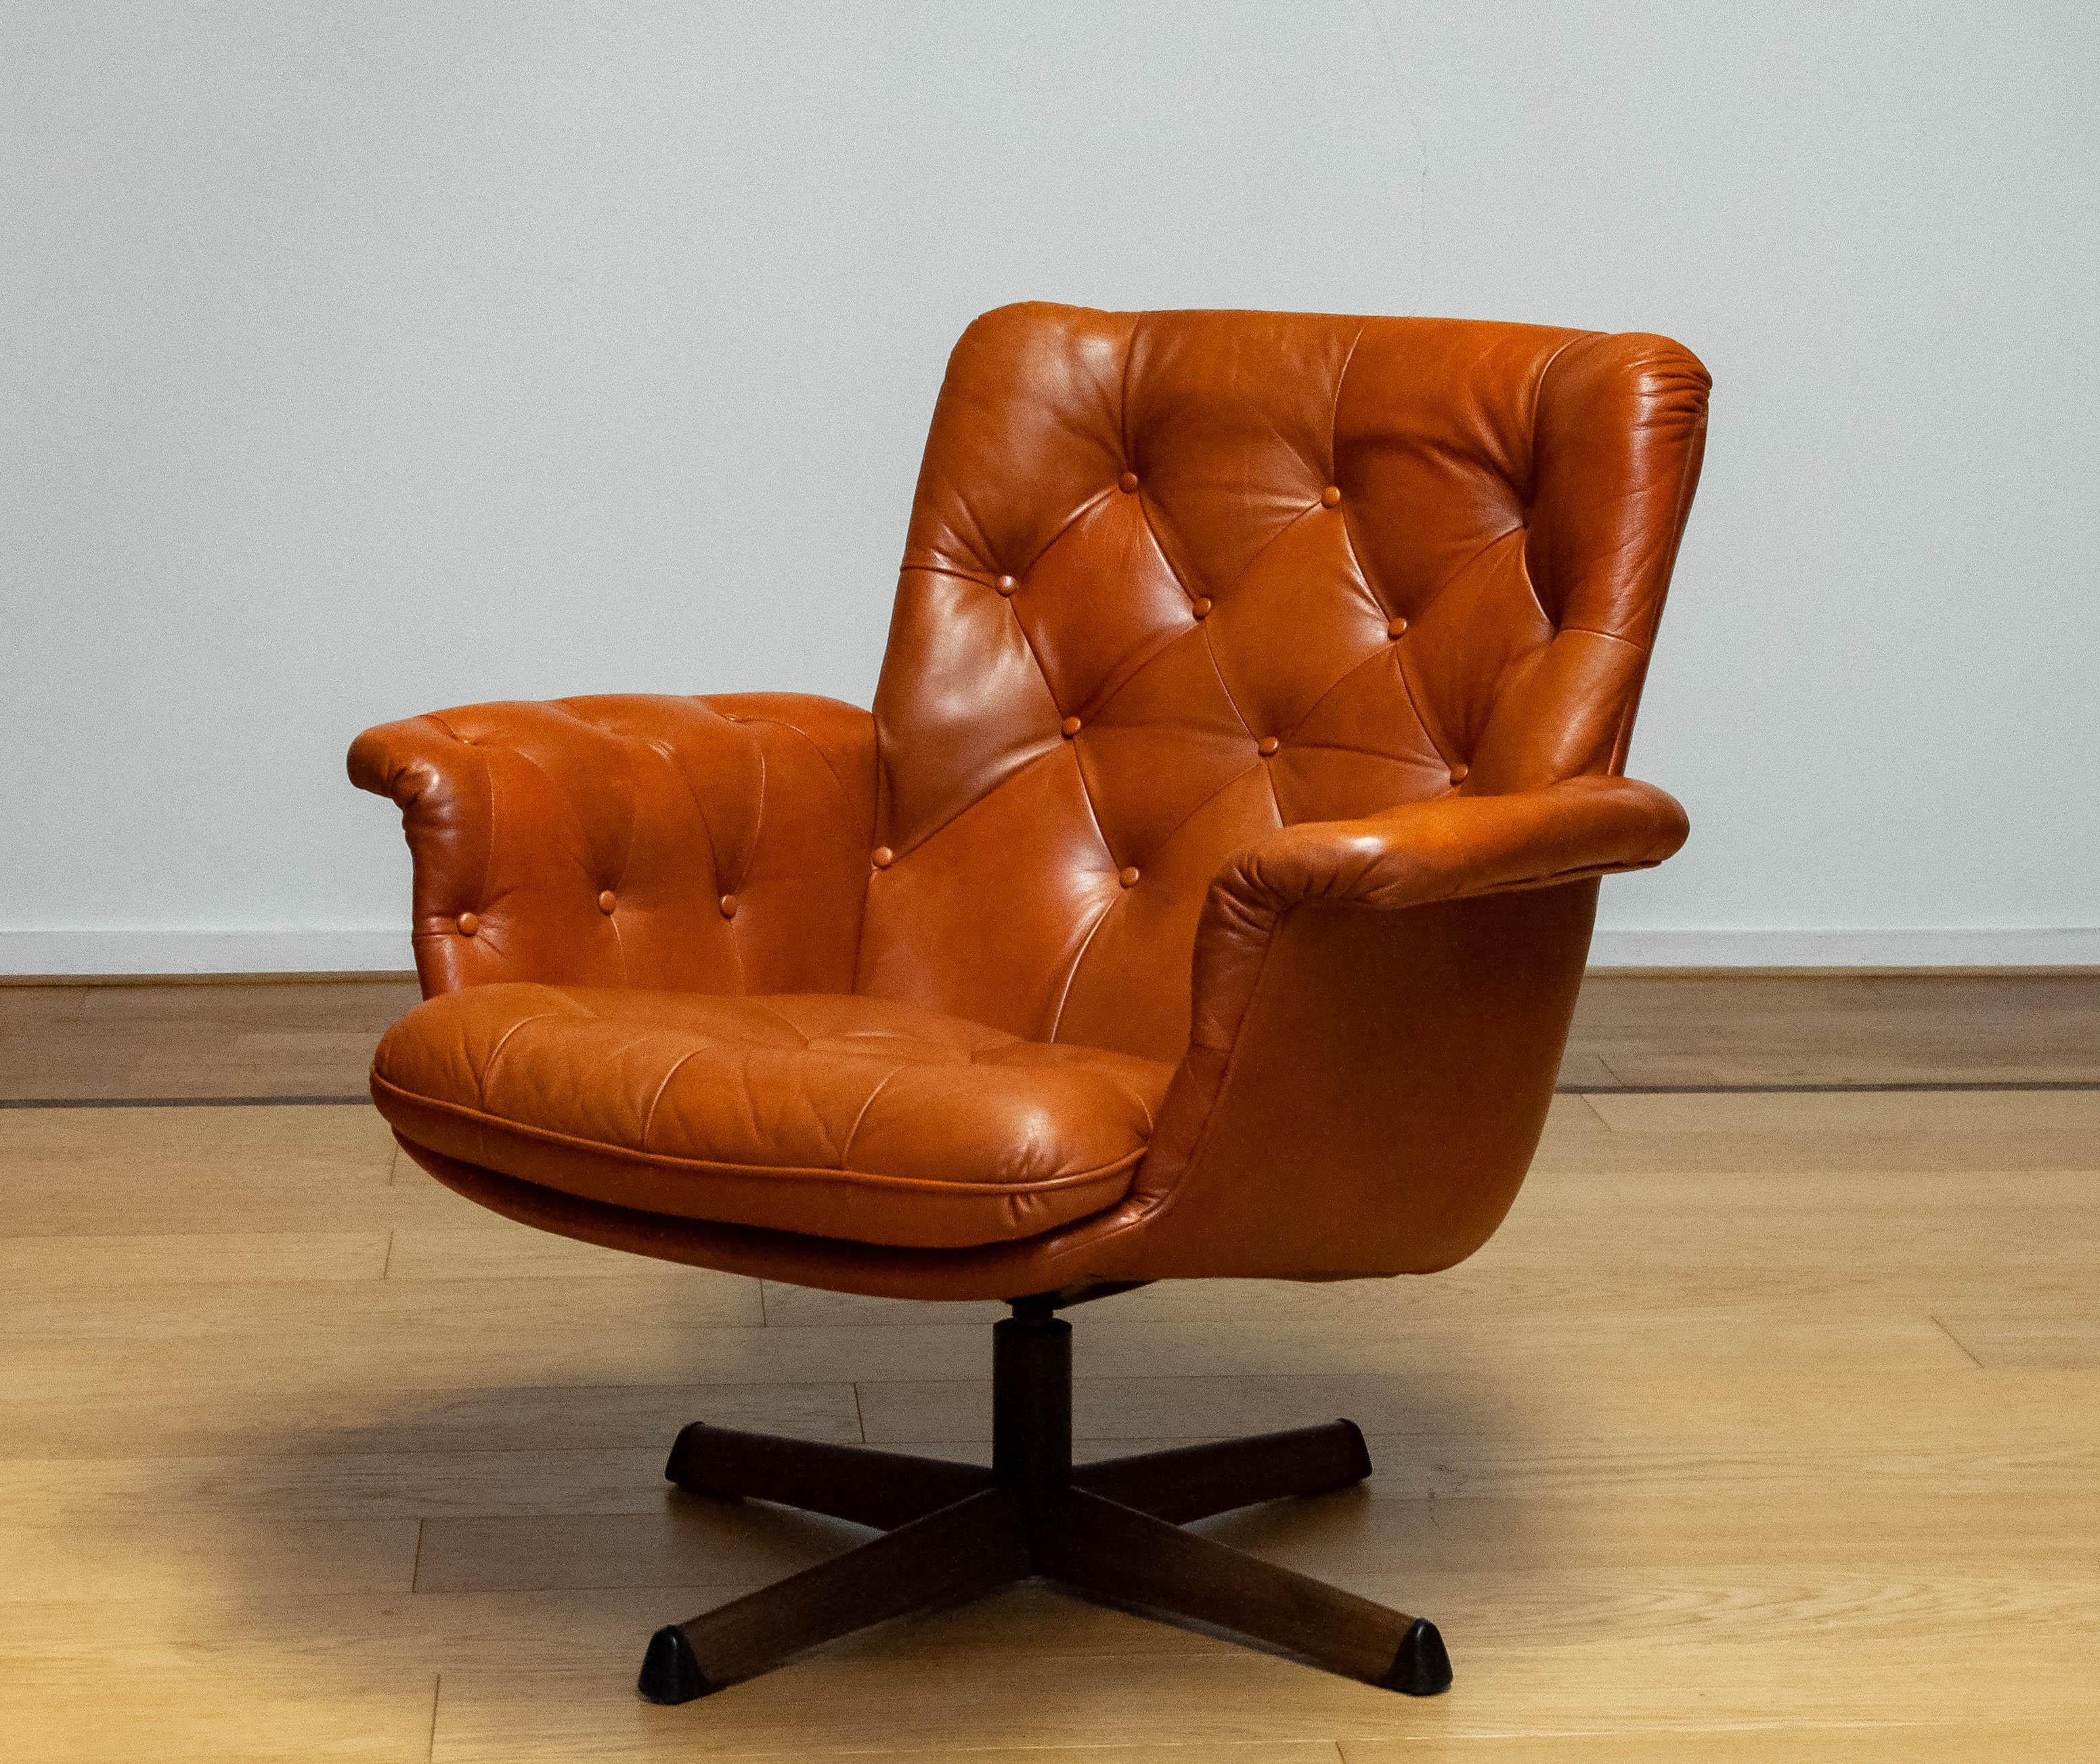 A beautiful swivel chair made by Göte Möbler Nässjö Sweden , 1960s.
This Chair is upholstered with tufted cognac leather on a metal with a woodprint swivel stand.
The chair is very comfortable and look fantastic in both classic and modern